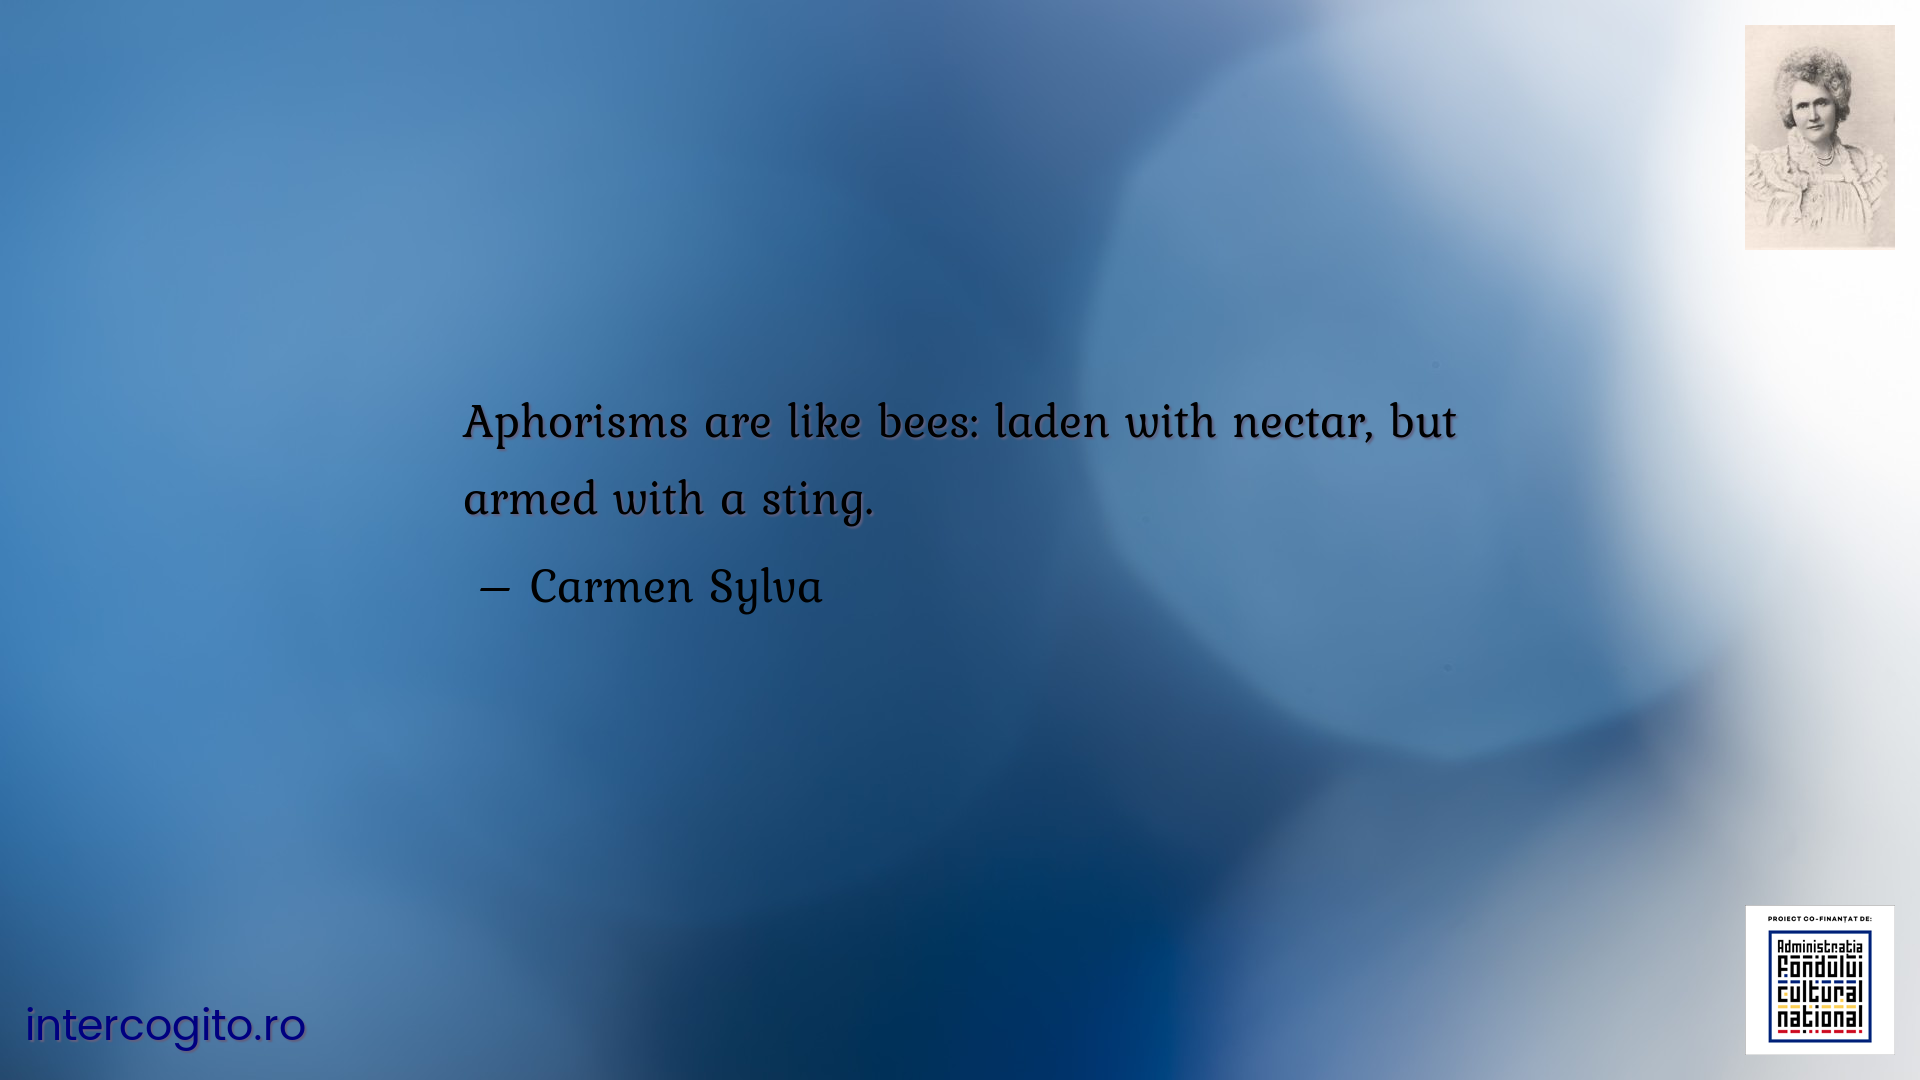 Aphorisms are like bees: laden with nectar, but armed with a sting.